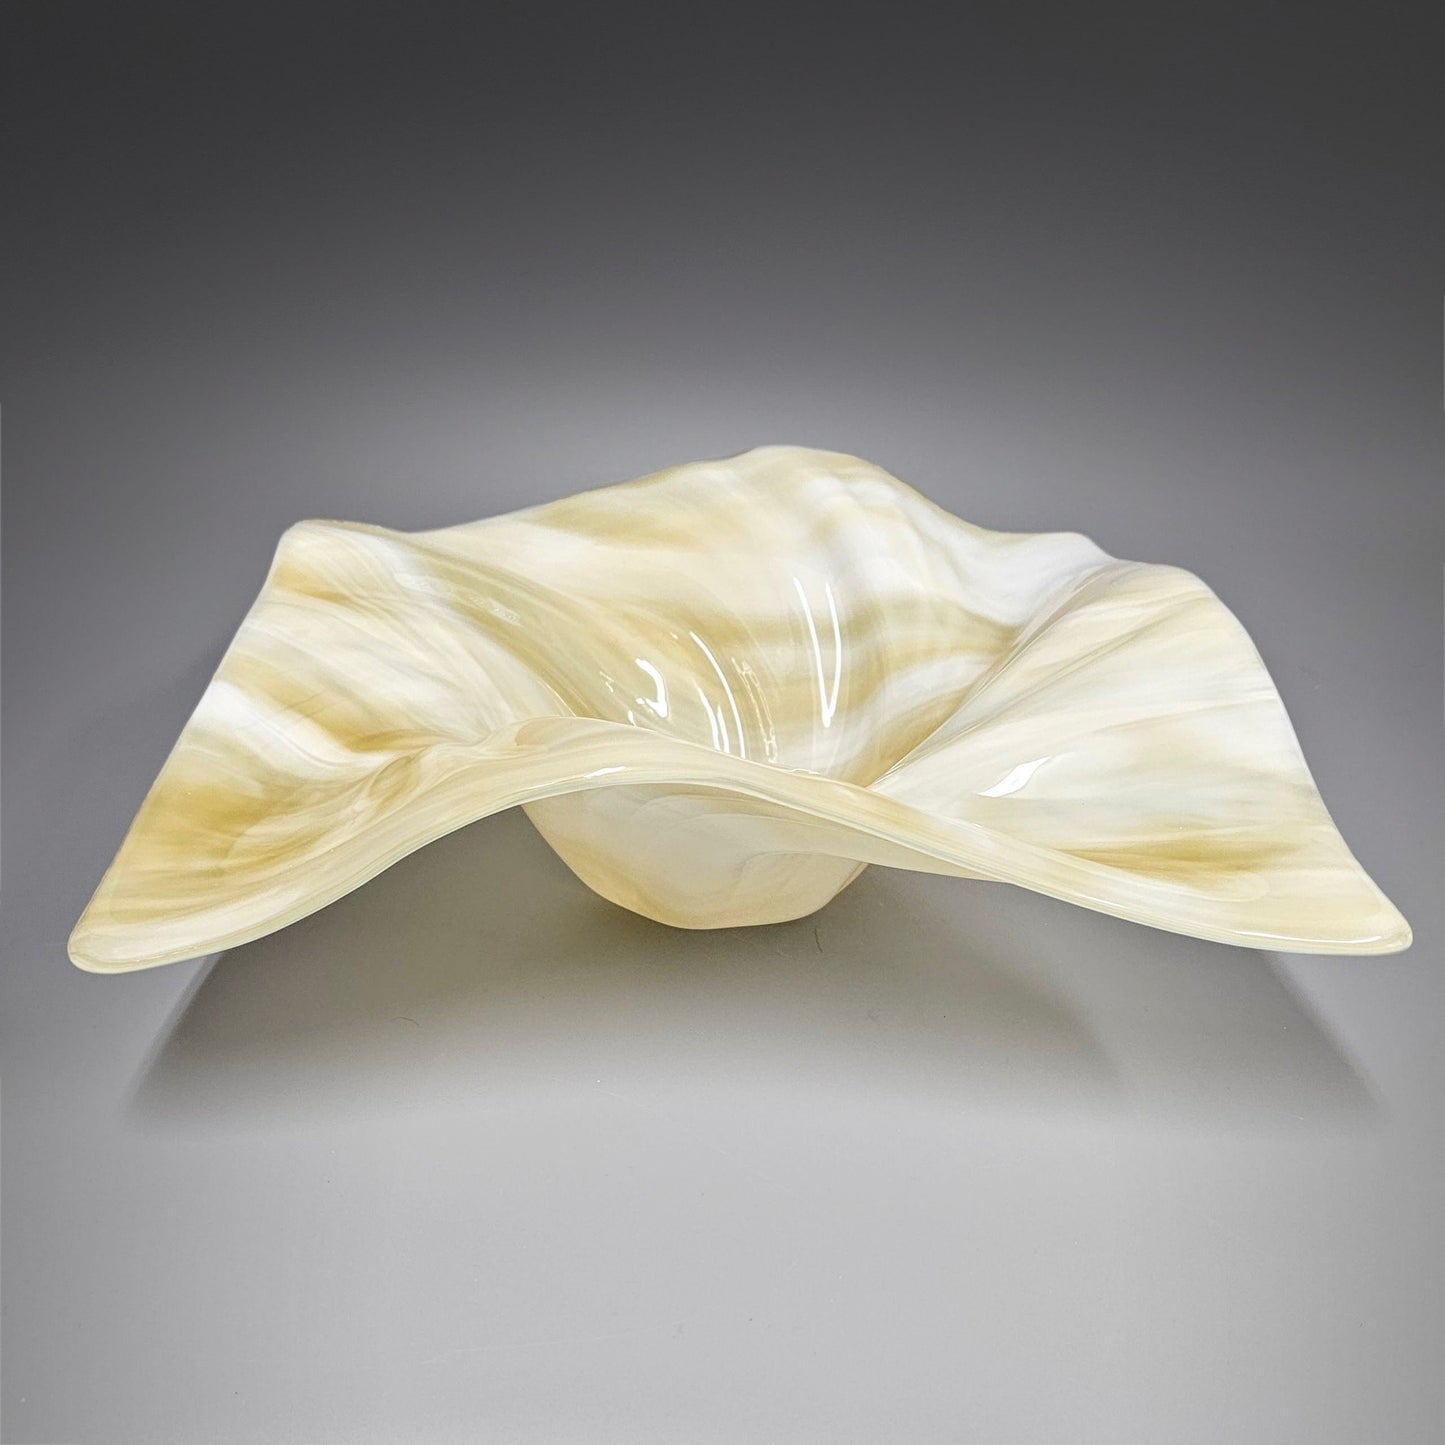 Glass Art Wave Bowl in Buttercream and White